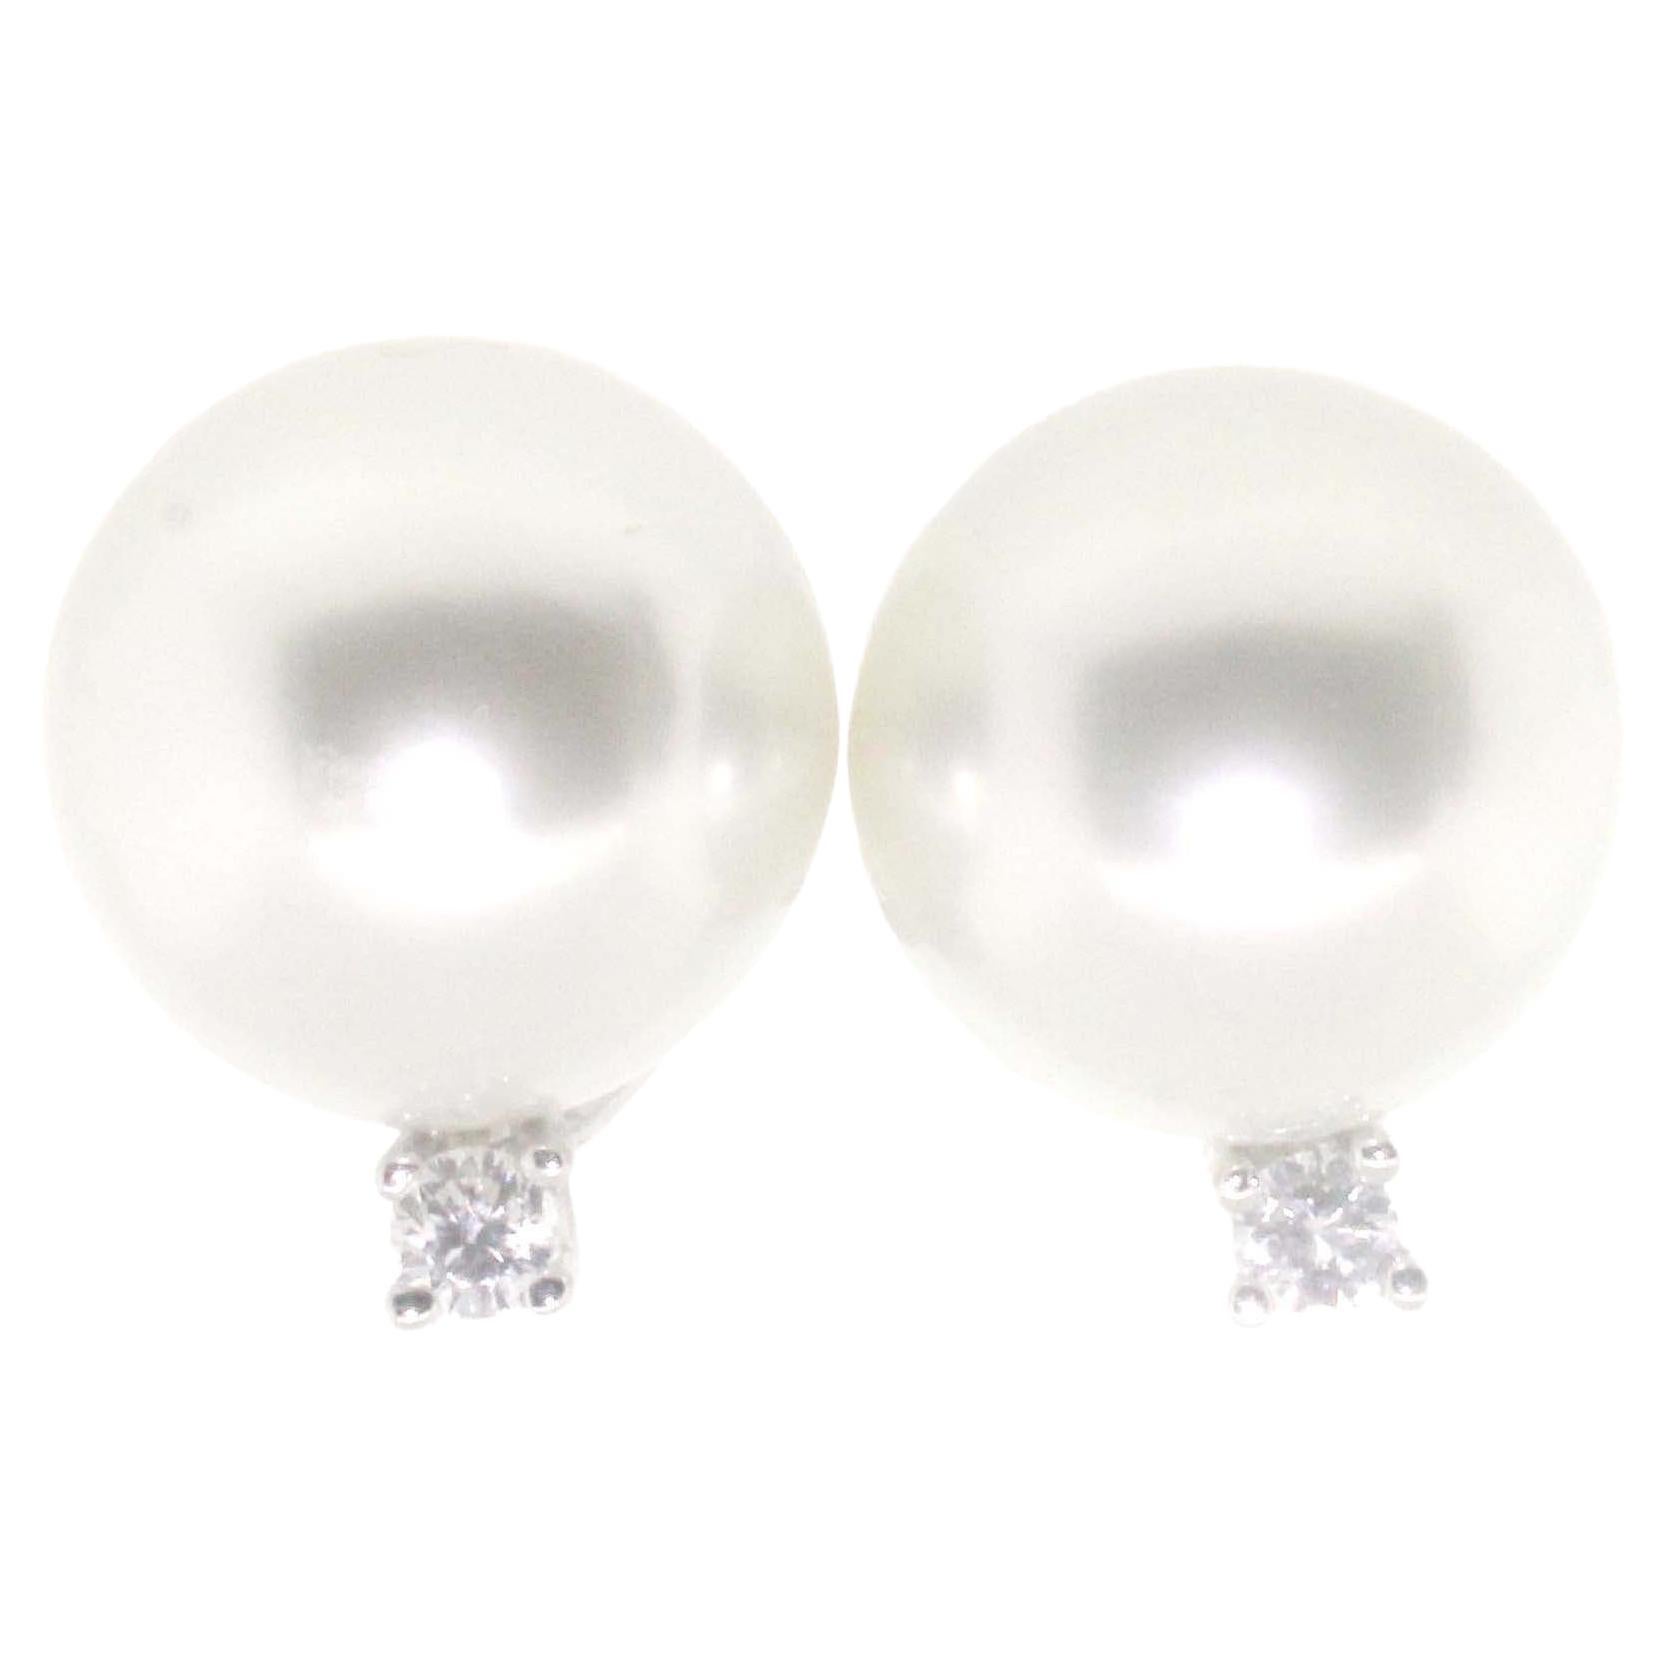 Hakimoto By Jewel Of Ocean South Sea Pearl Diamond Earring
13 mm South Sea Pearl
18K White Gold Made In Germany Clip without Post Earrings
All measurements and sizes and color And description are approximate 
